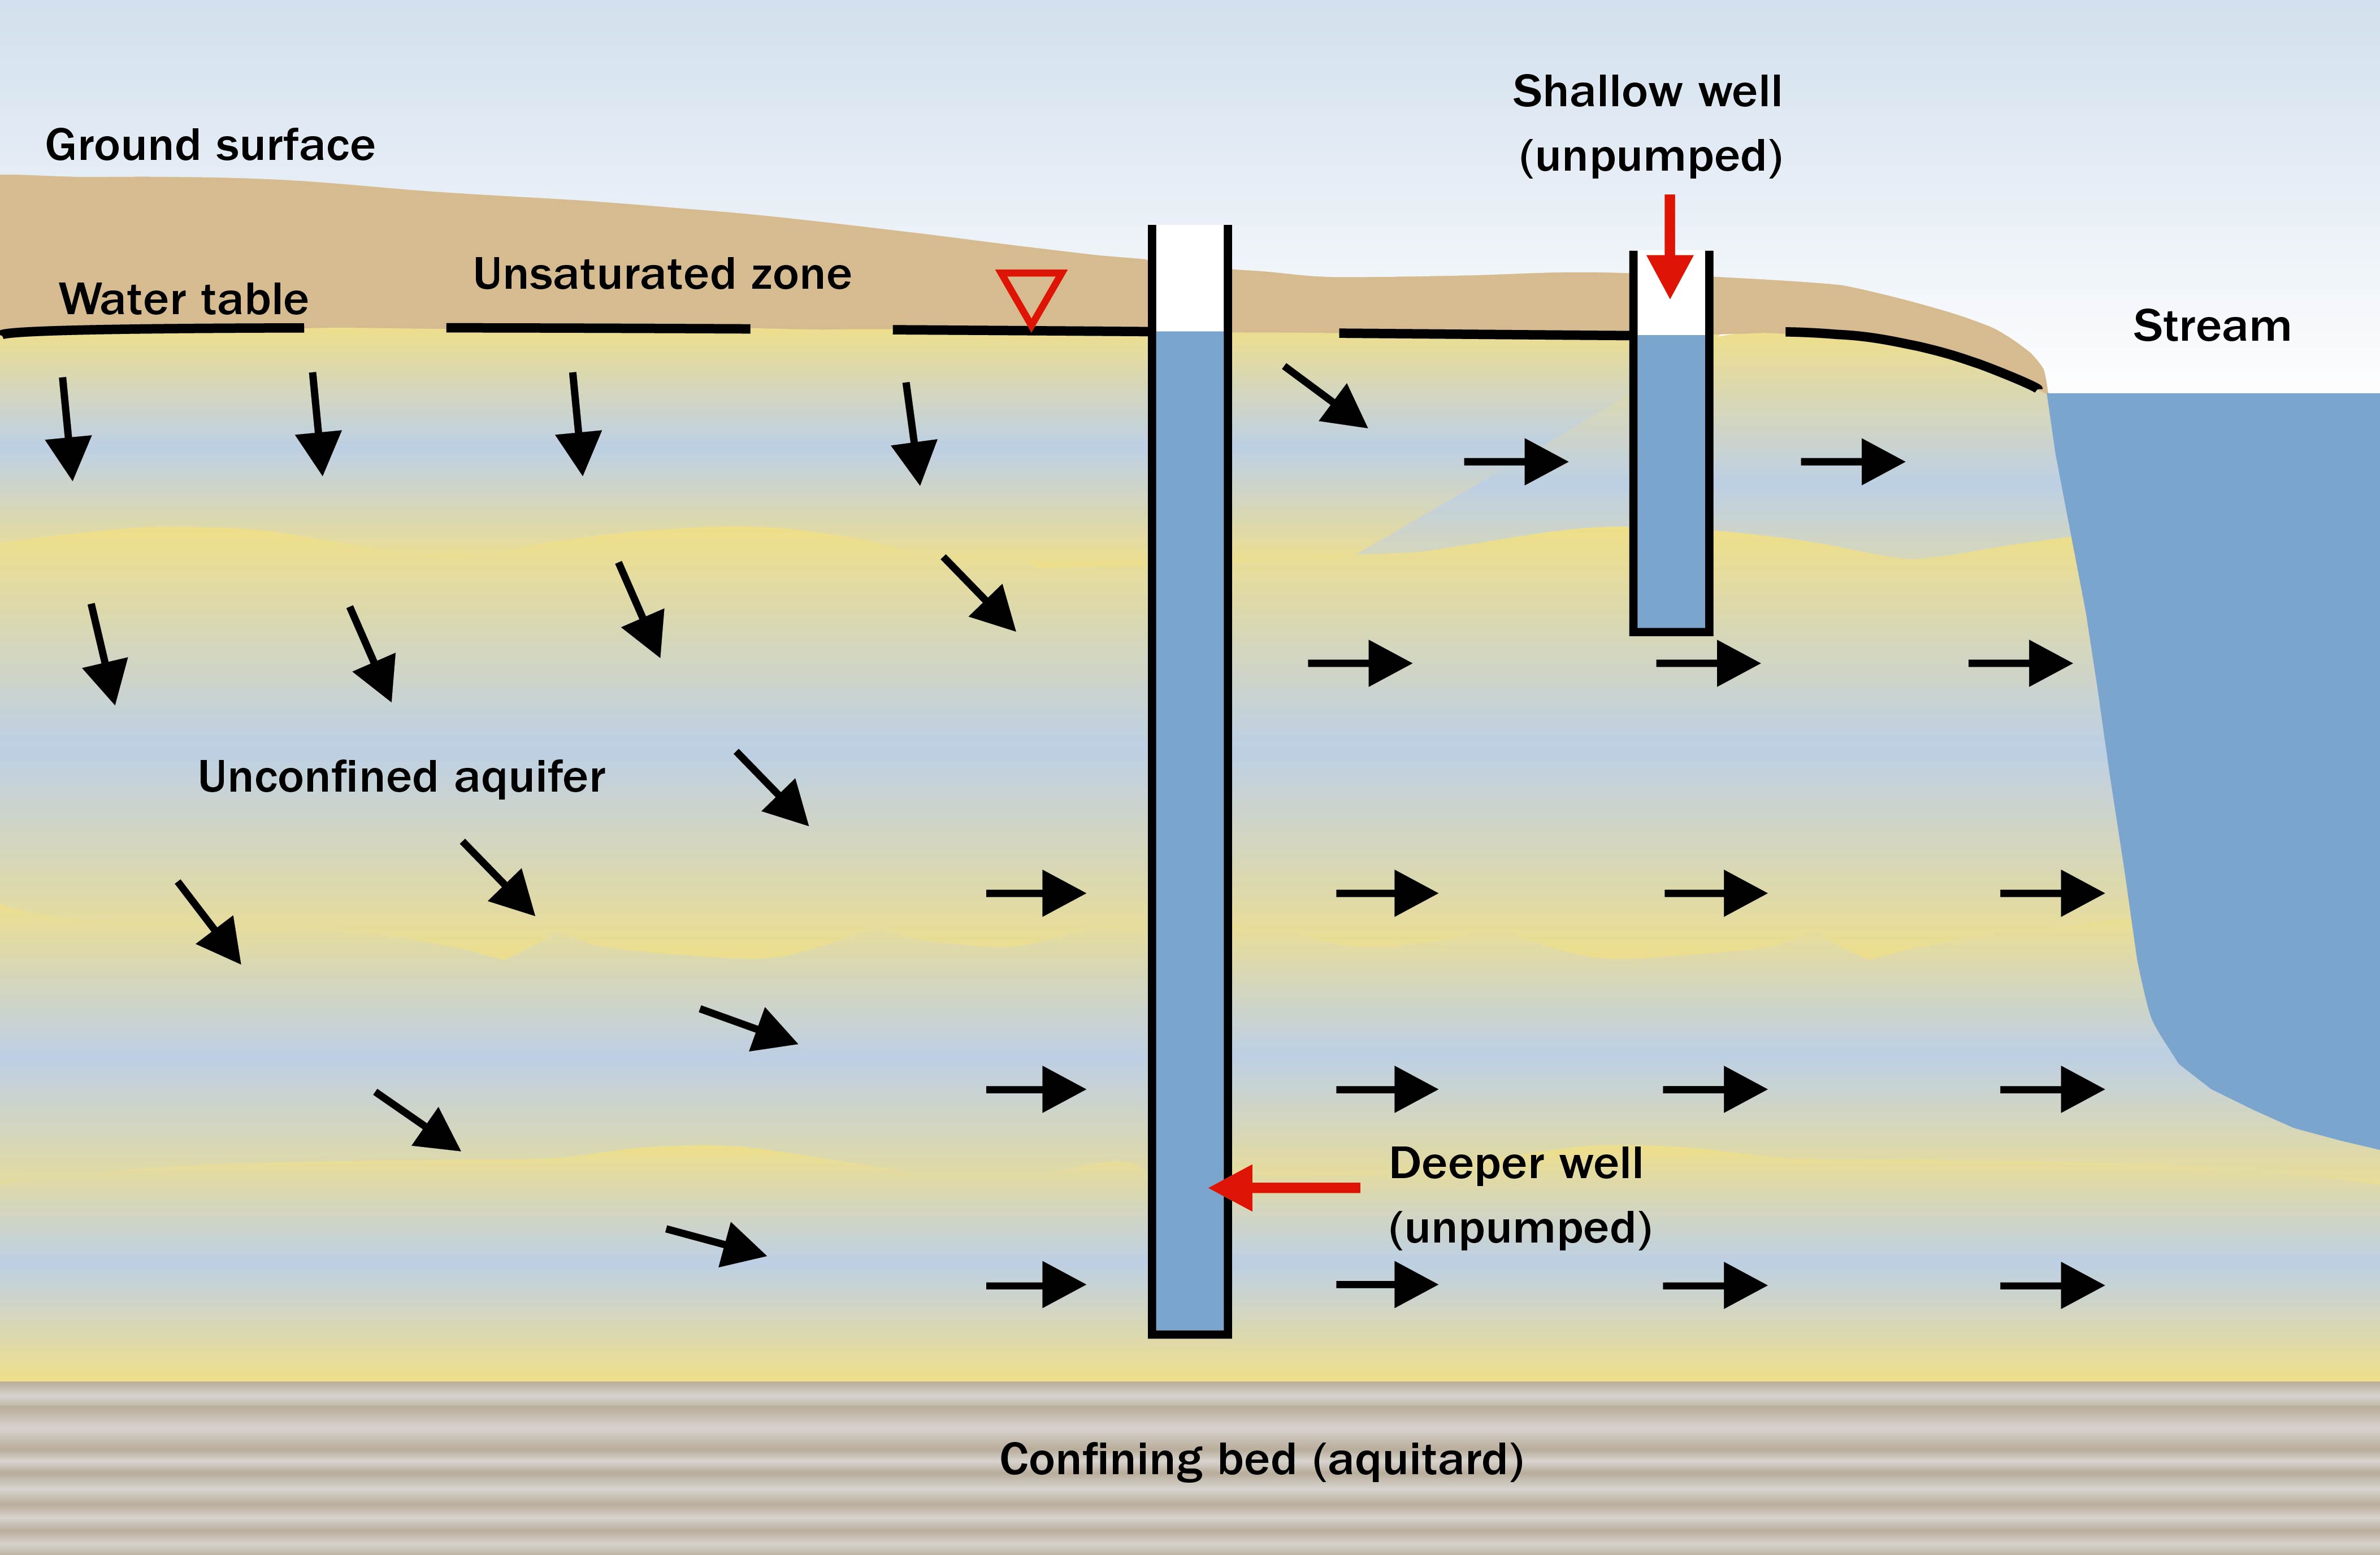 Figure 1.This drawing shows the movement of groundwater from a water table or unsaturated zone as it moves through deep and shallow wells and into a stream located to the right of the wells.